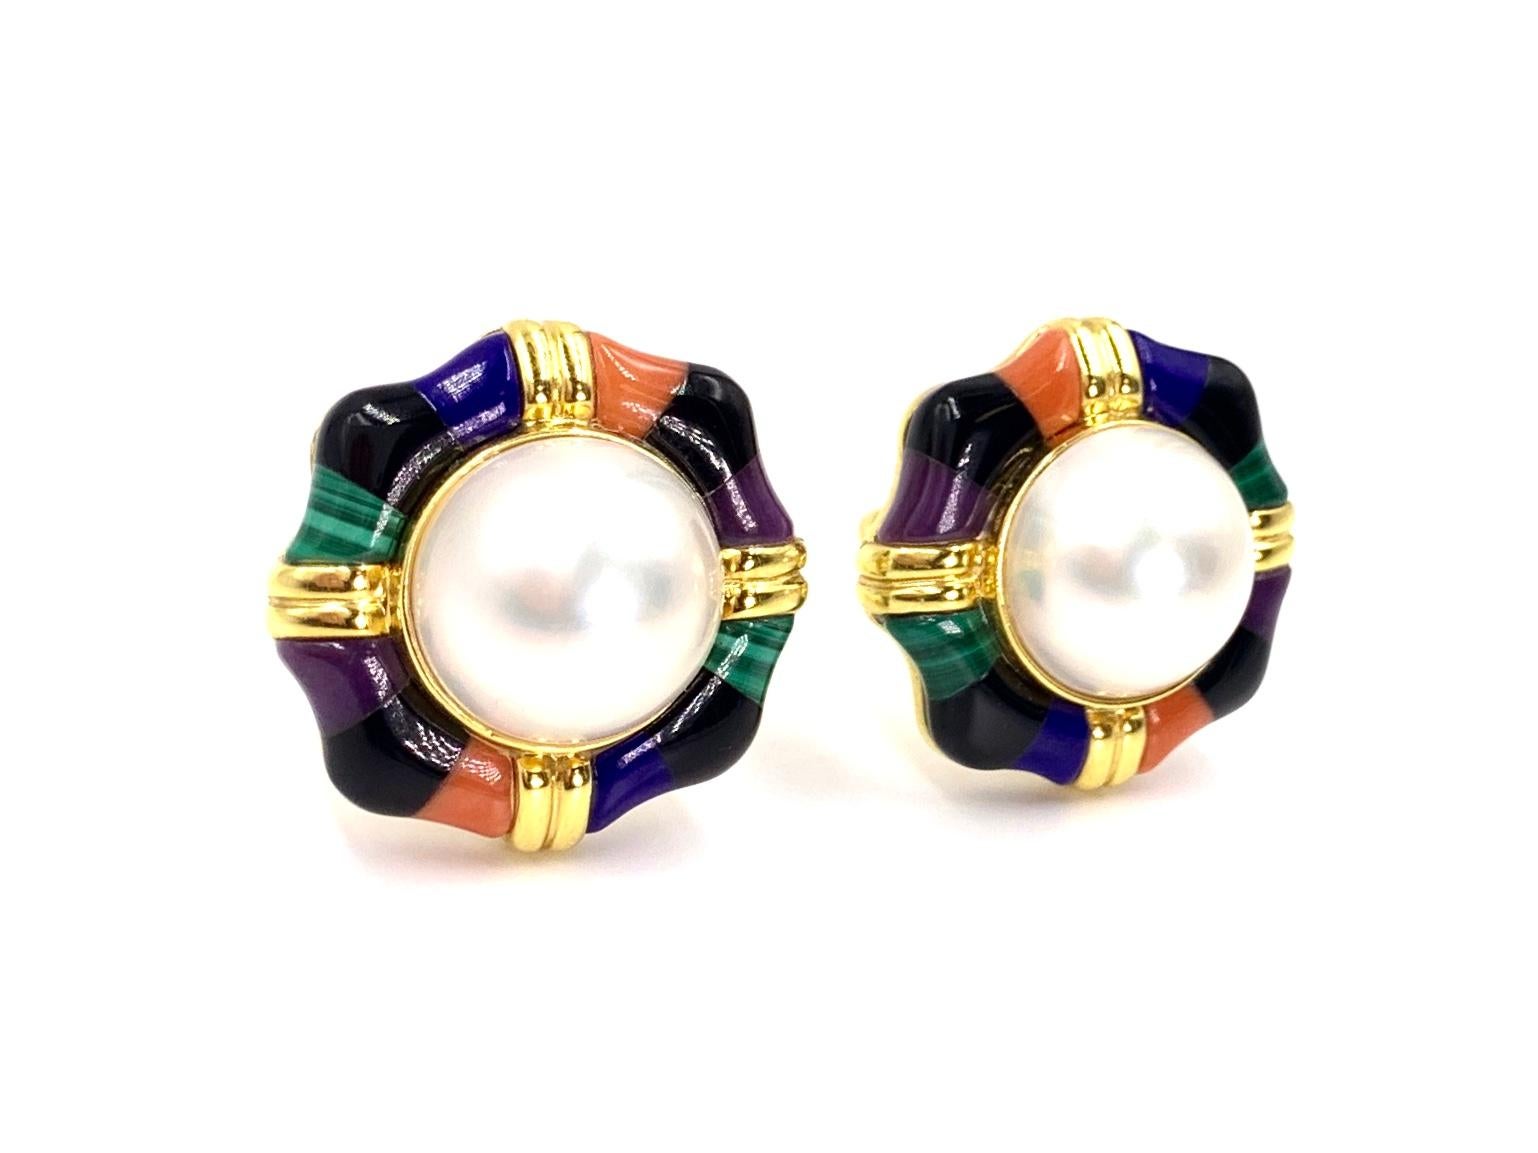 Beautiful large button style 14 karat yellow gold Asch Grossbardt earrings featuring a natural ivory 15mm mabe pearl surrounded by exquisitely-executed inlaid stones. Stones include coral, lapis, onyx, malachite and purple sugilite. Earrings are